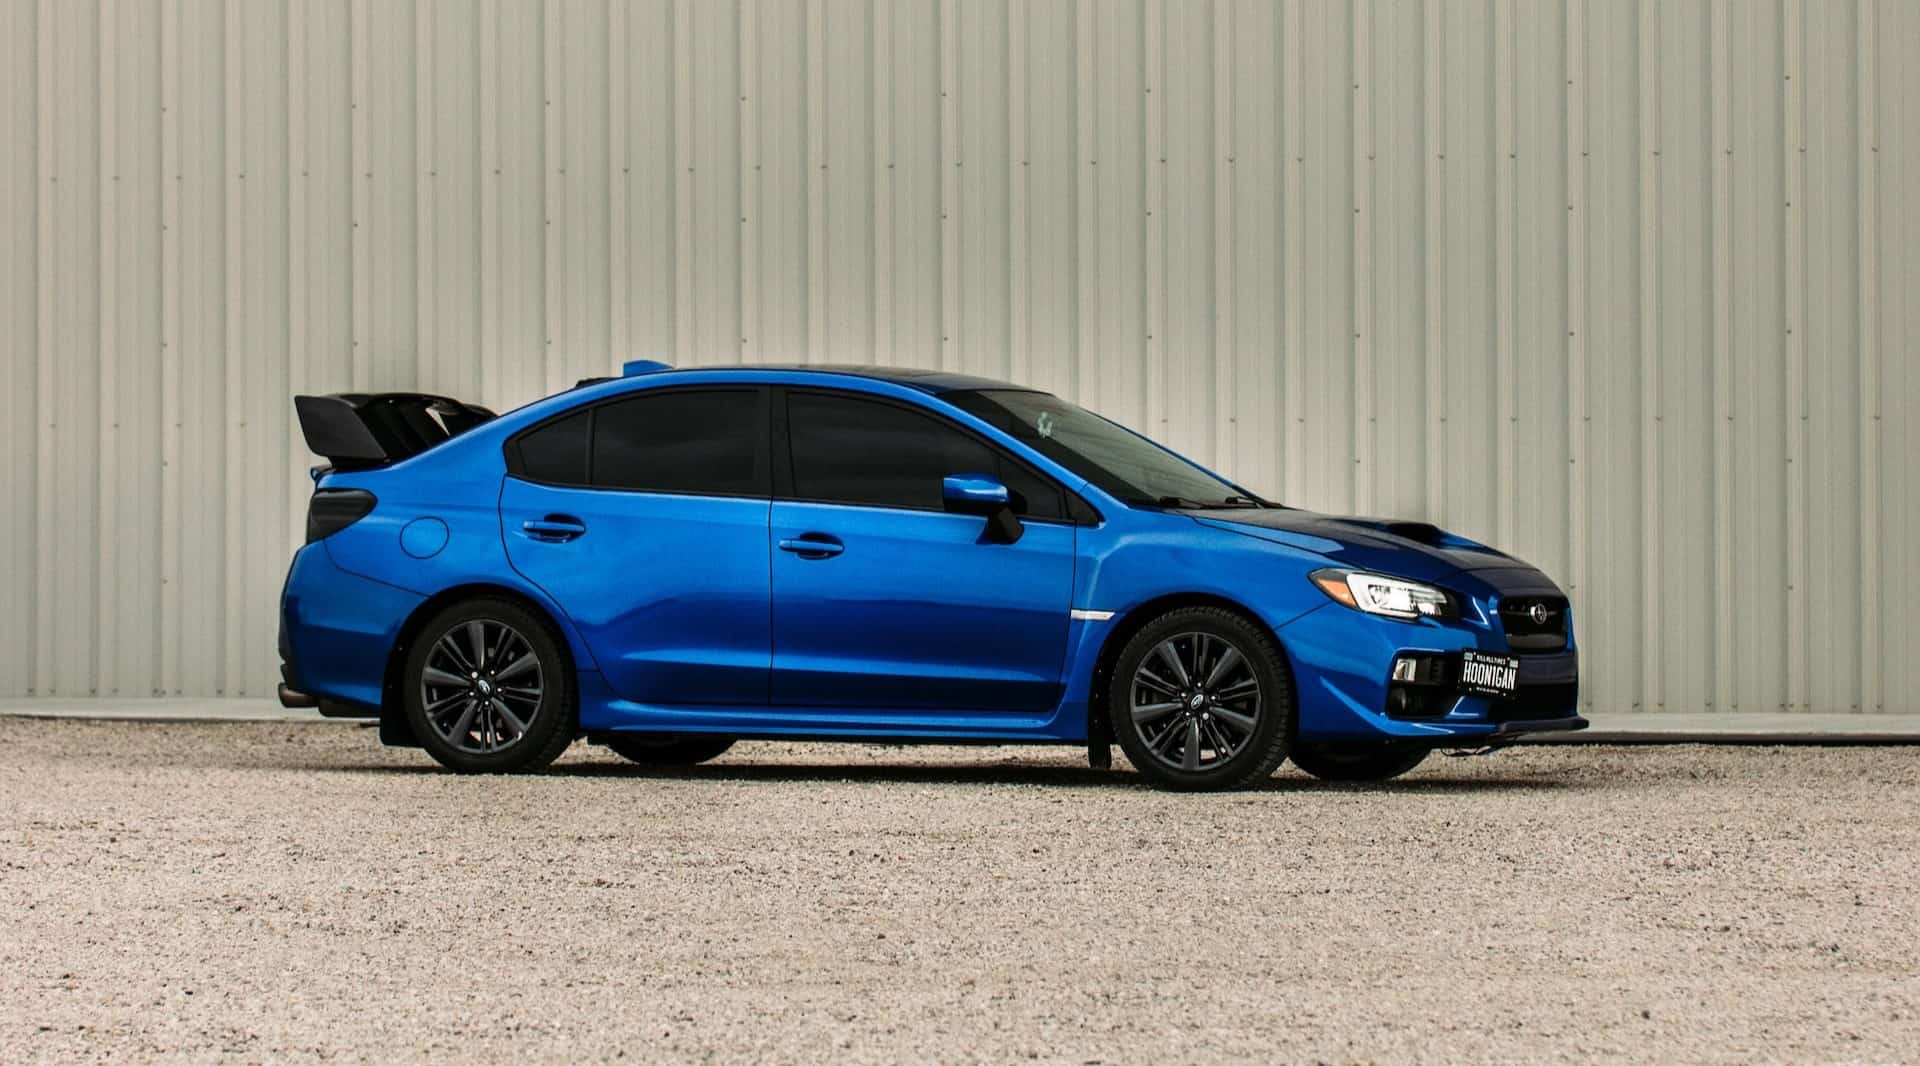 The Most Expensive Subaru Models in 2023